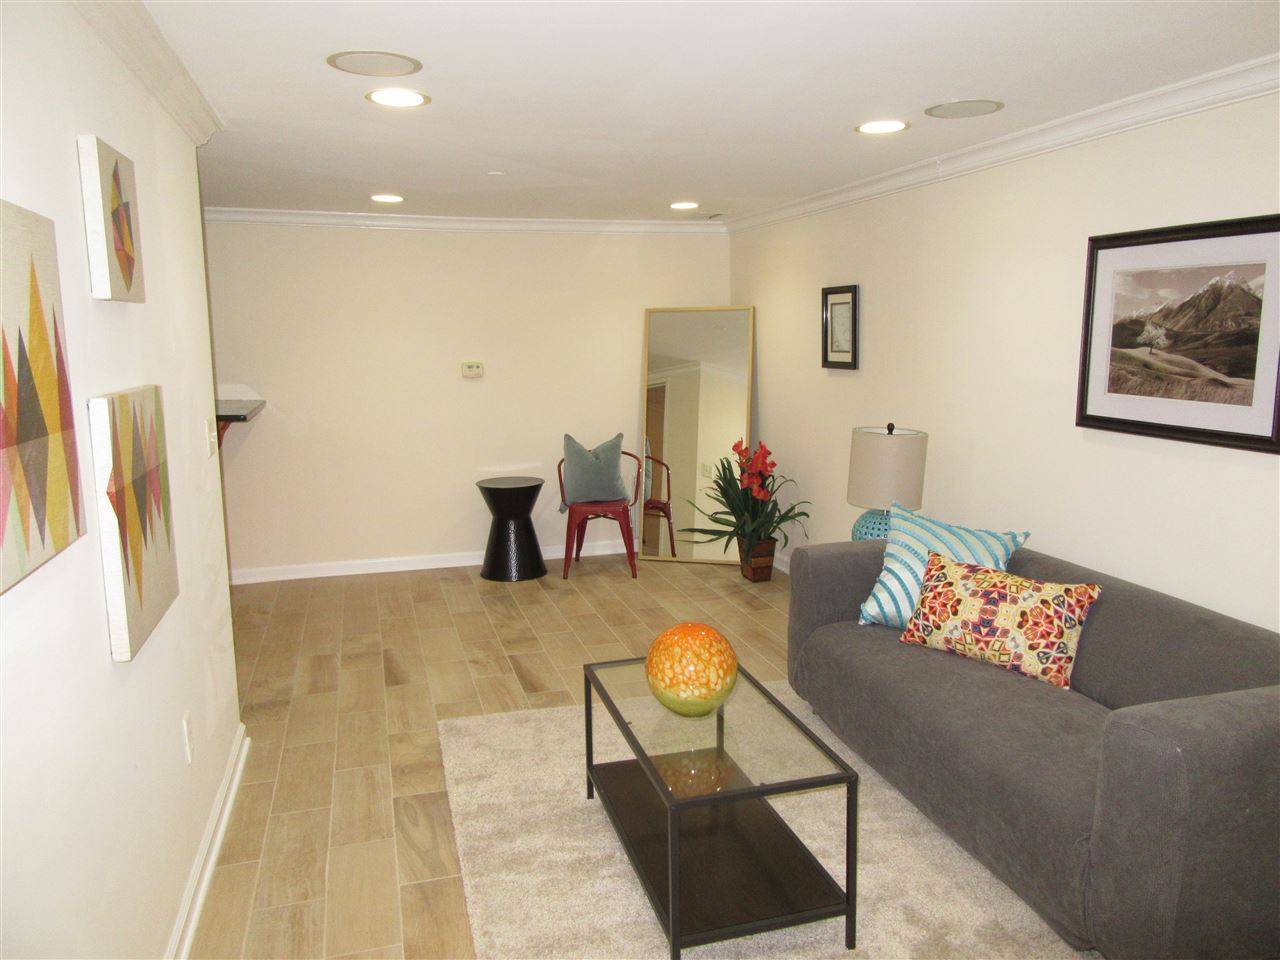 Check out this spacious - 3 BR Condo The Heights New Jersey